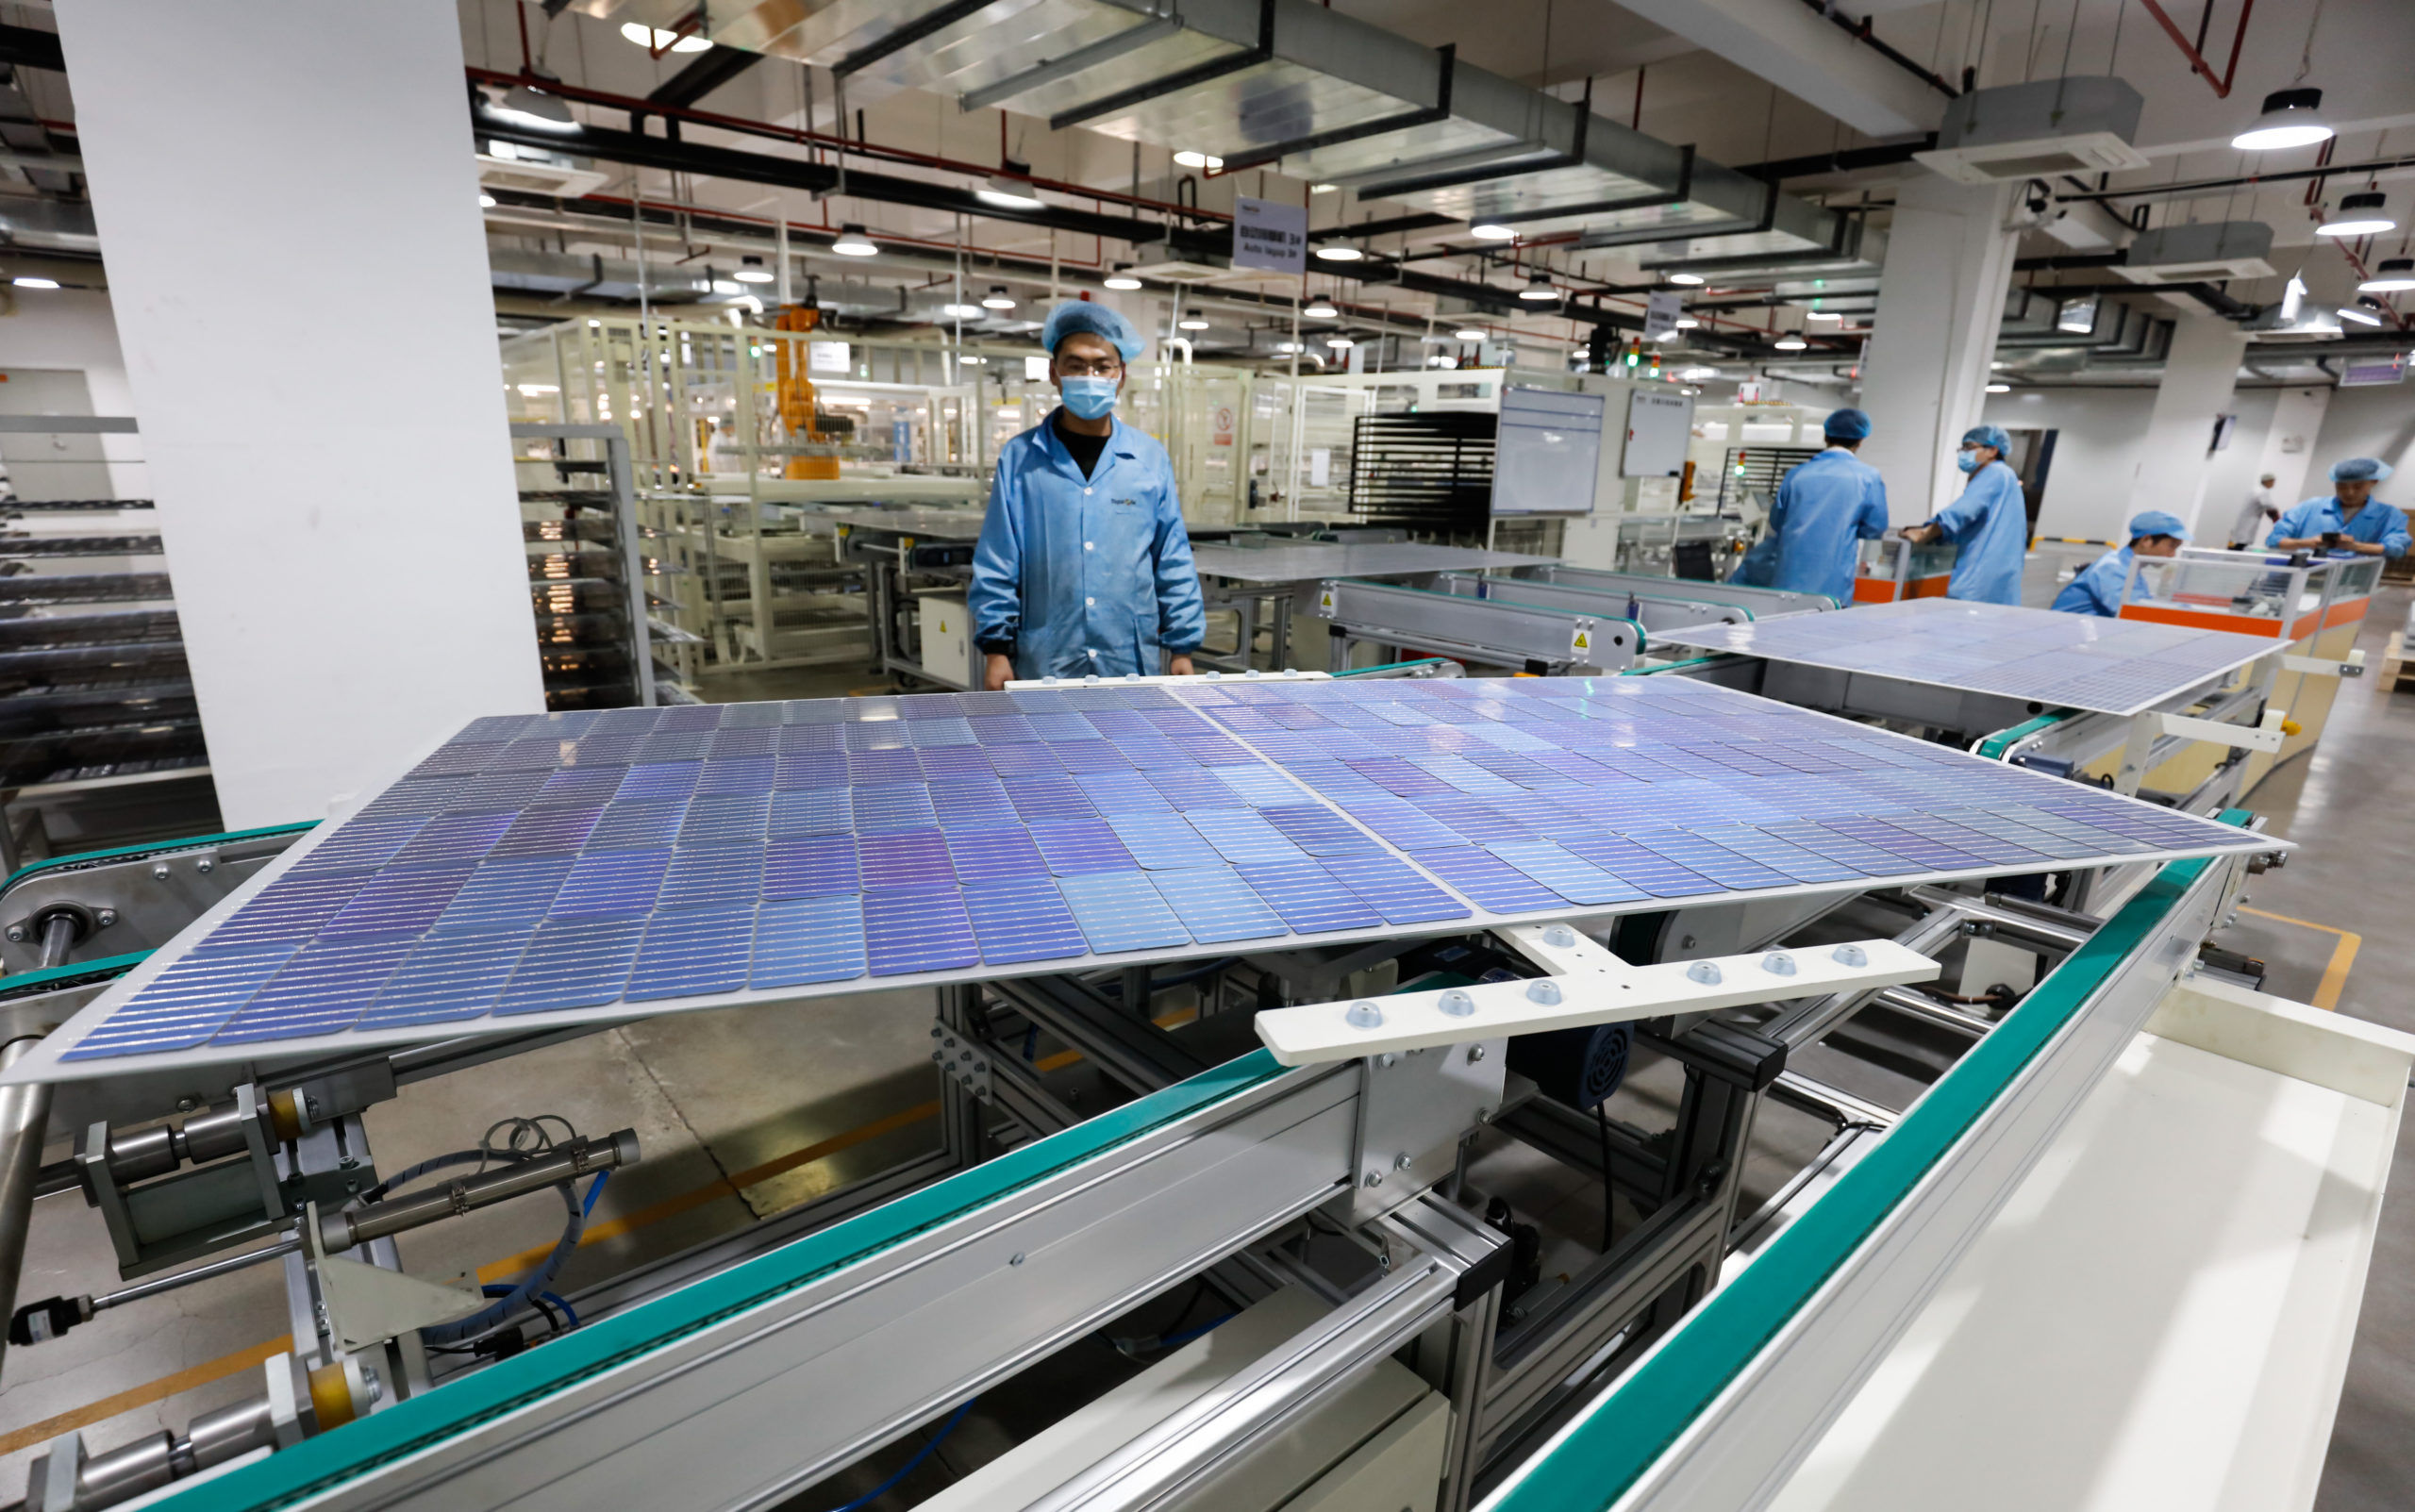 Workers operate equipment to produce photovoltaic circuit boards at a production workshop of a green energy technology company